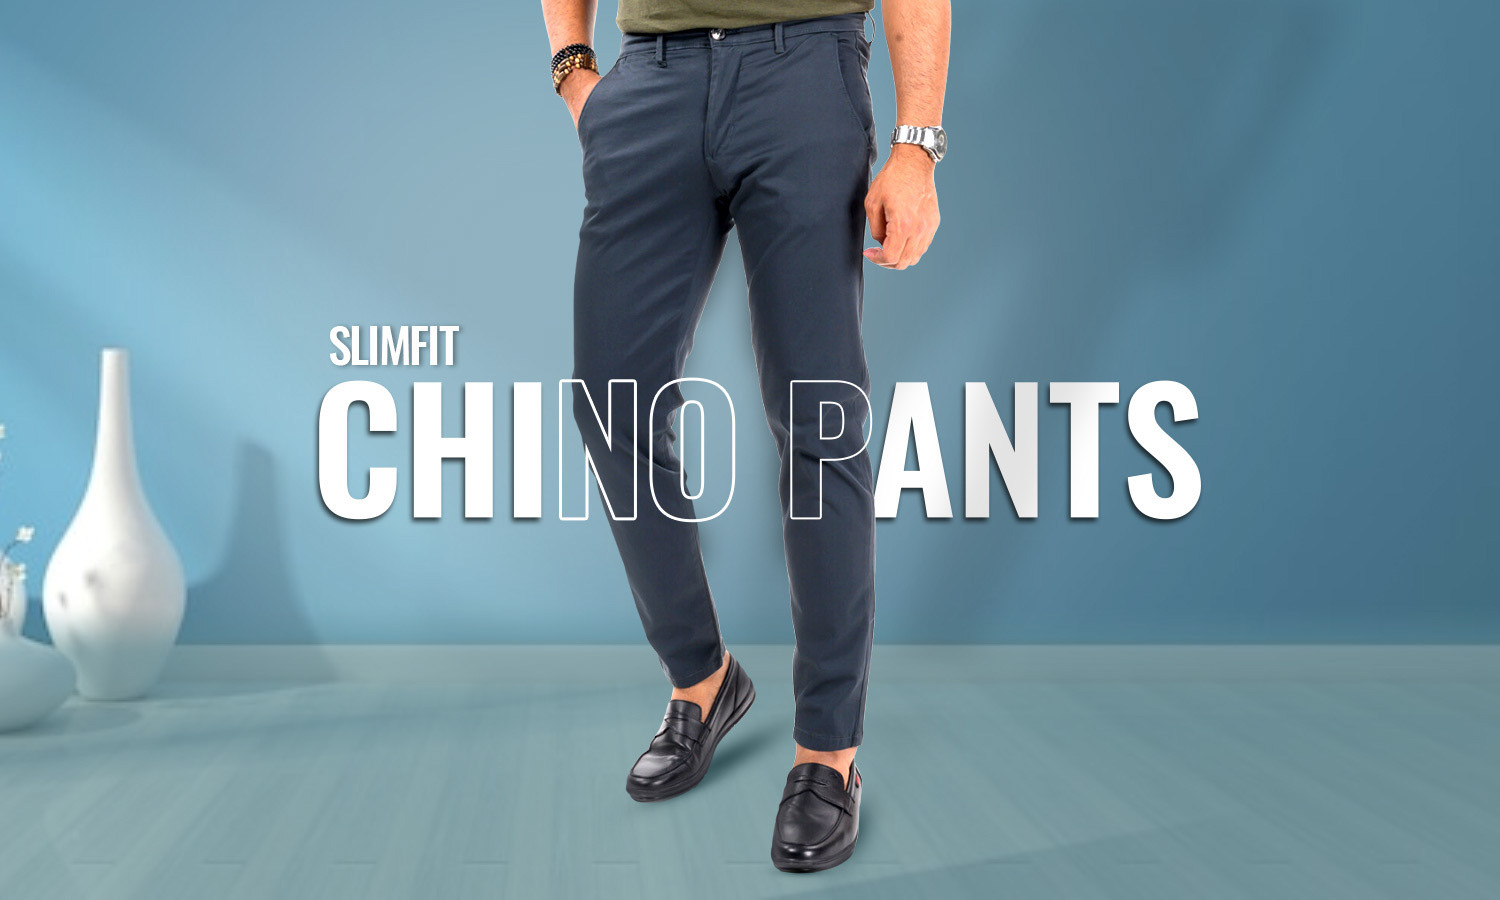 A Strong Fashion Taste Is Created When Chinos Are Worn Instead of Jeans rendition image